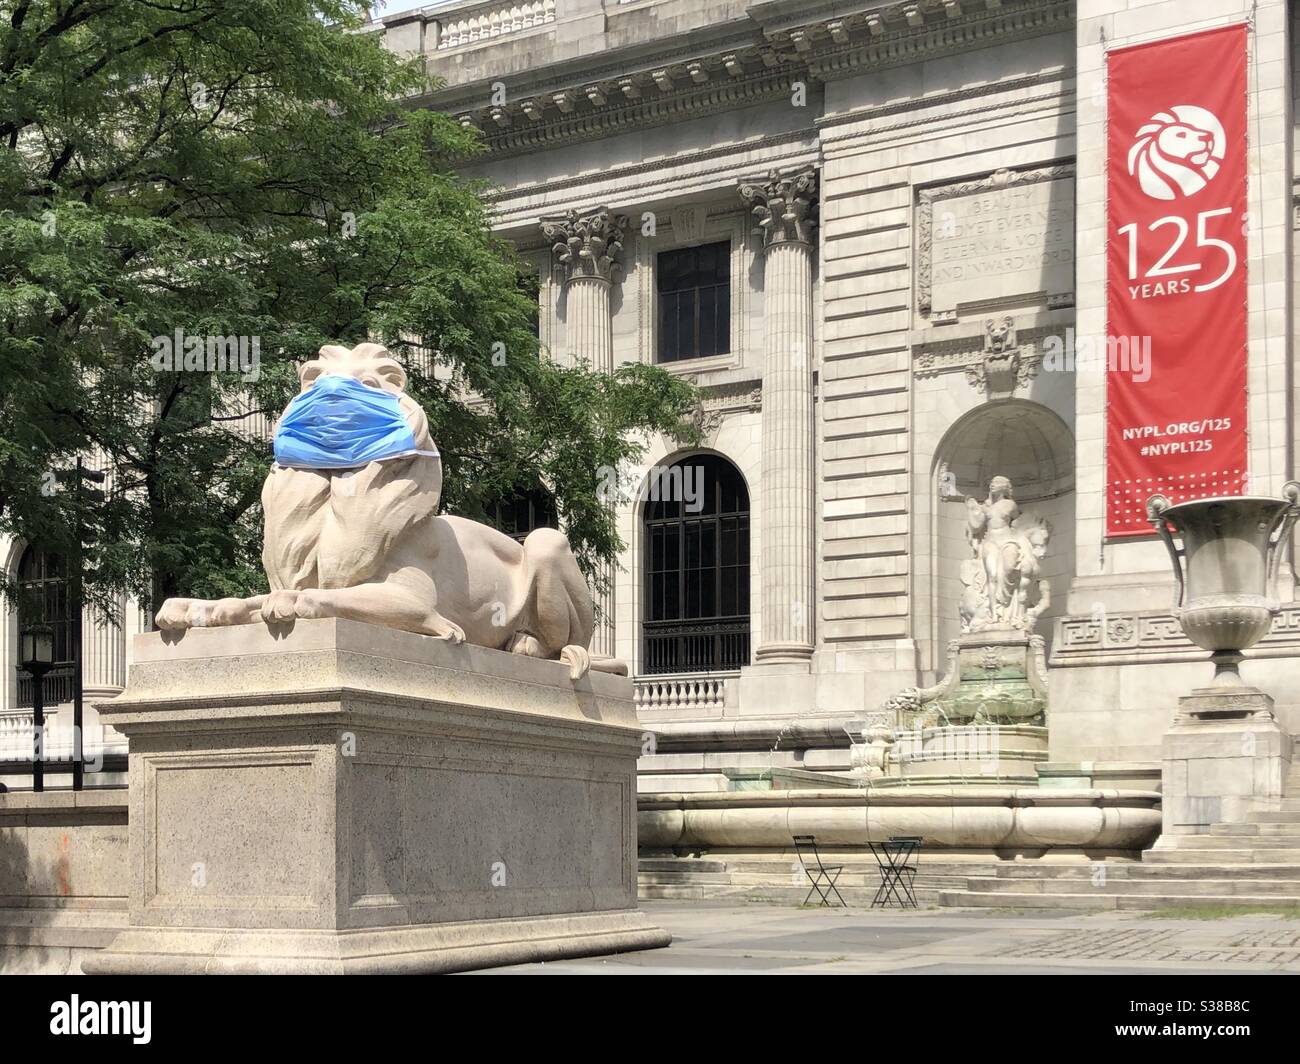 Masked library lions, Patience and Fortitude, at the New York Public Library in midtown Manhattan. Stock Photo